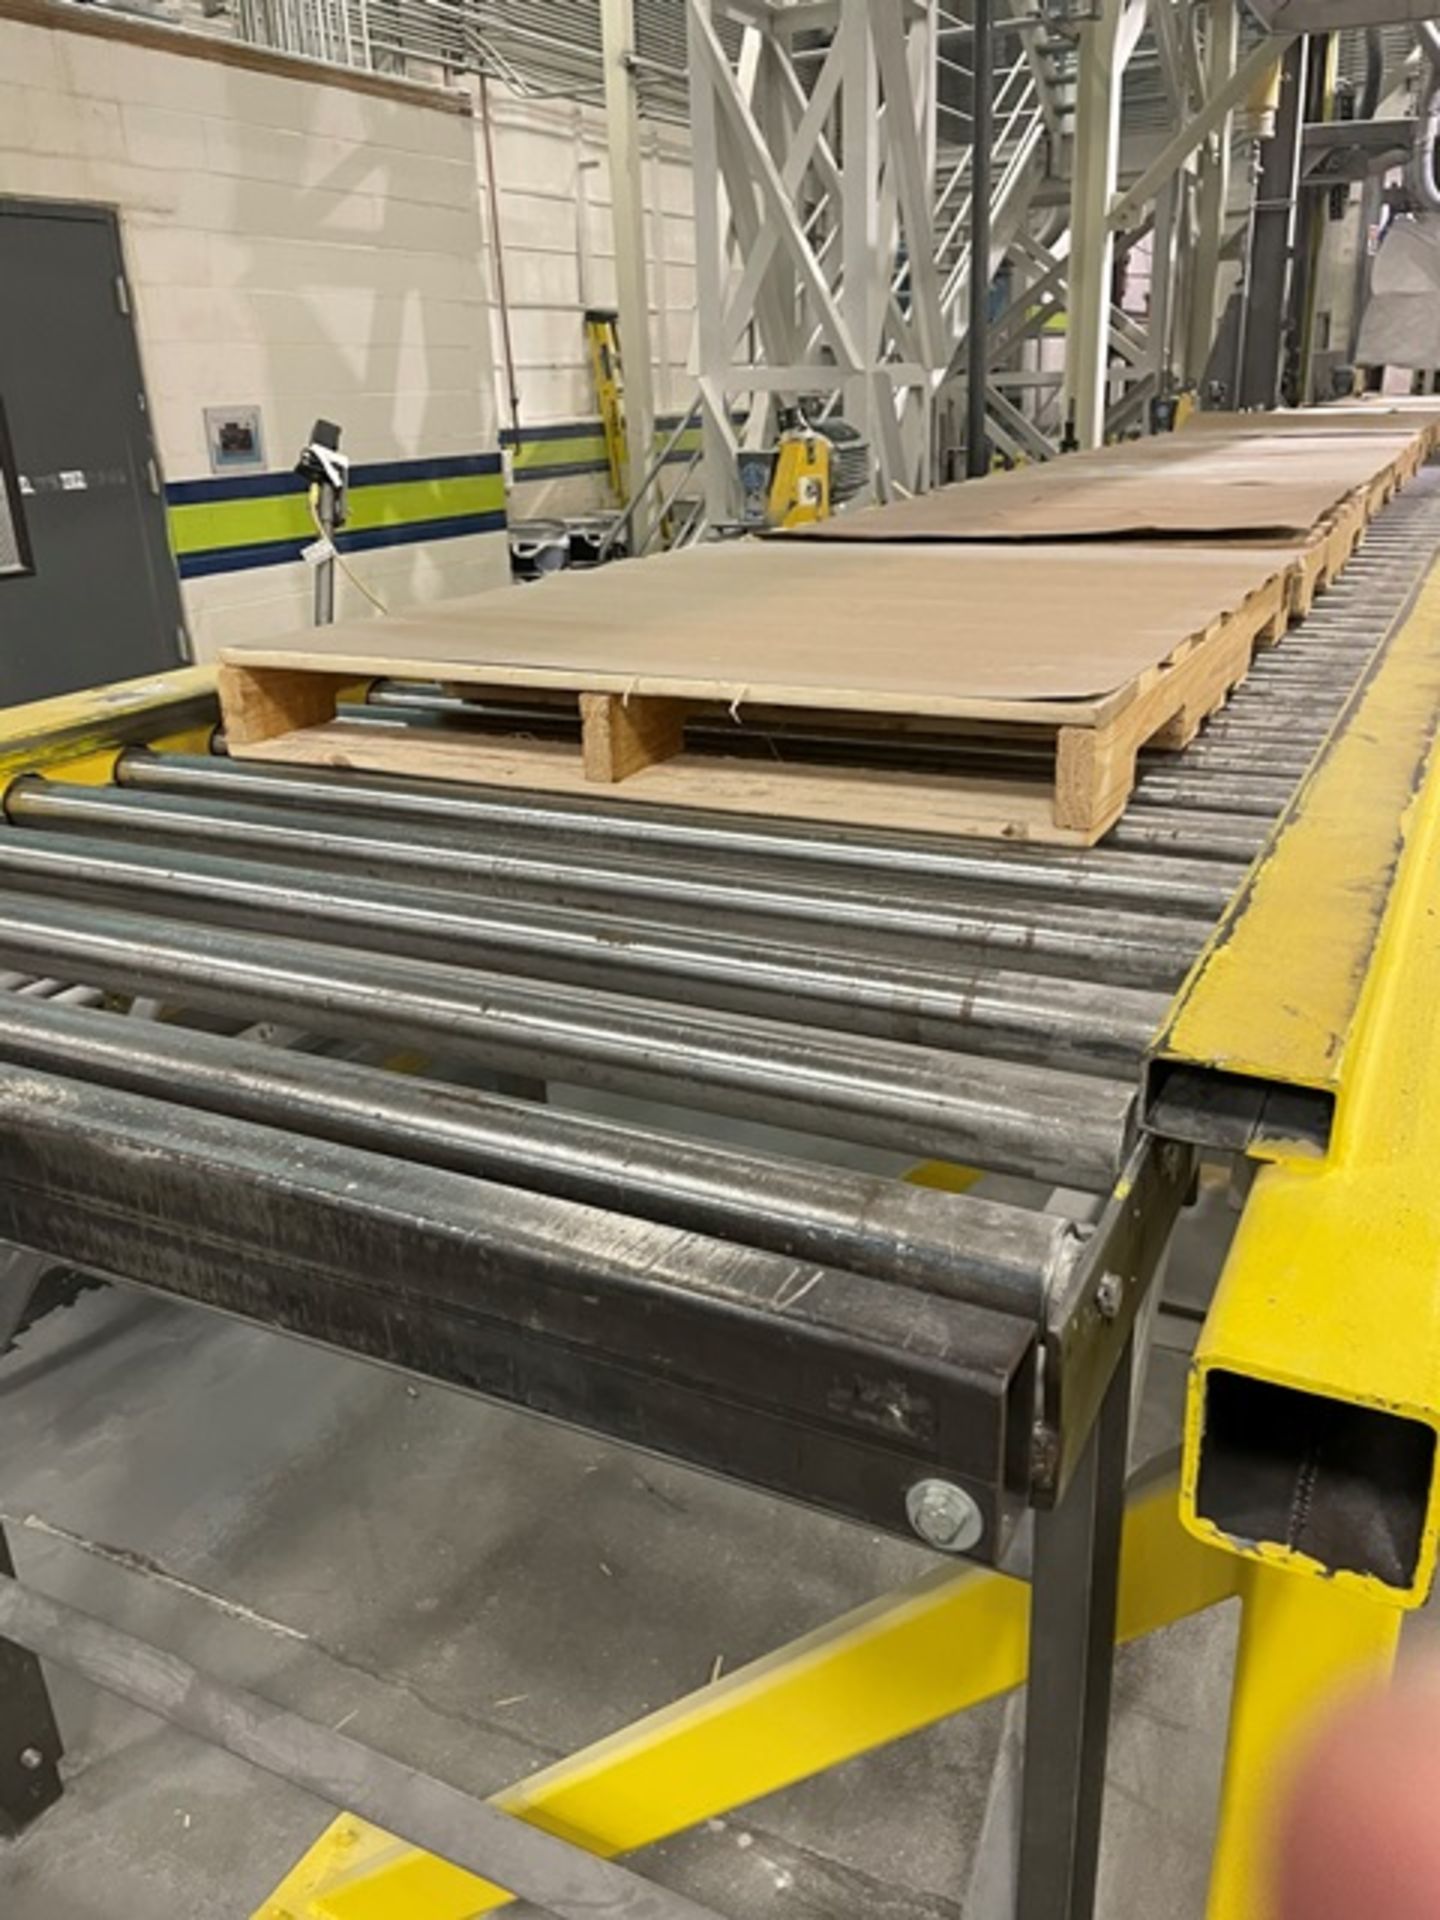 Motorized Roller Conveyor, Approx. 30' Total Length - Image 3 of 3